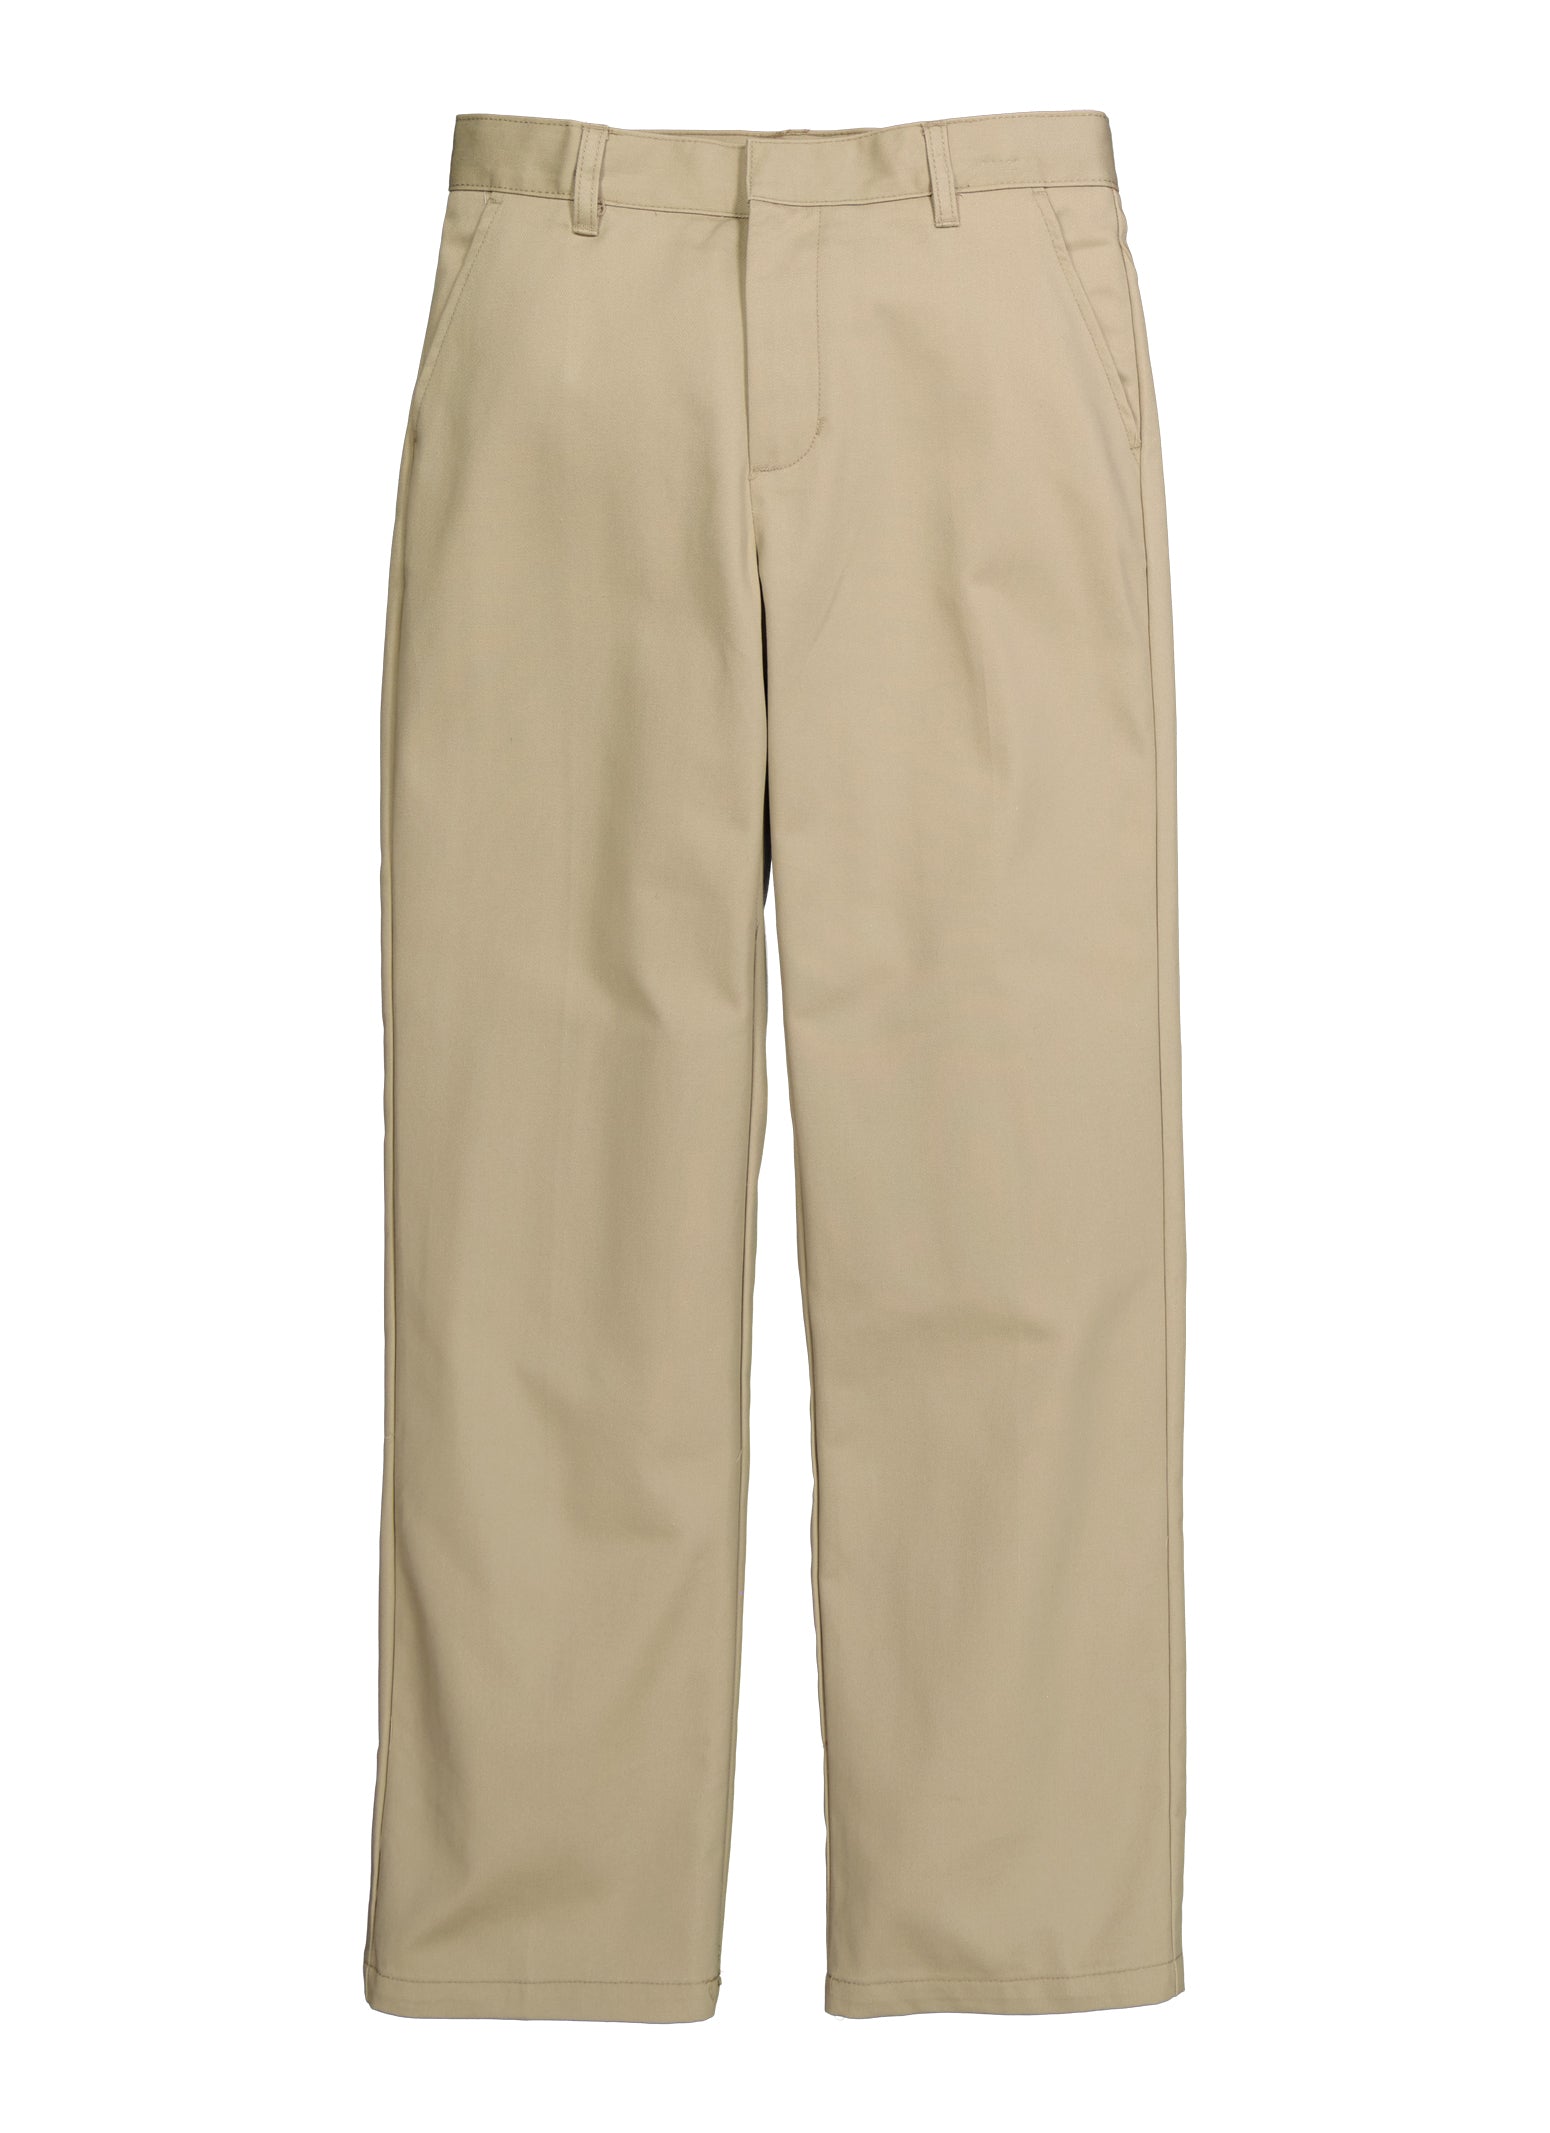 French Toast Boys 8-16 Relaxed Fit Twill Pants, Khaki,